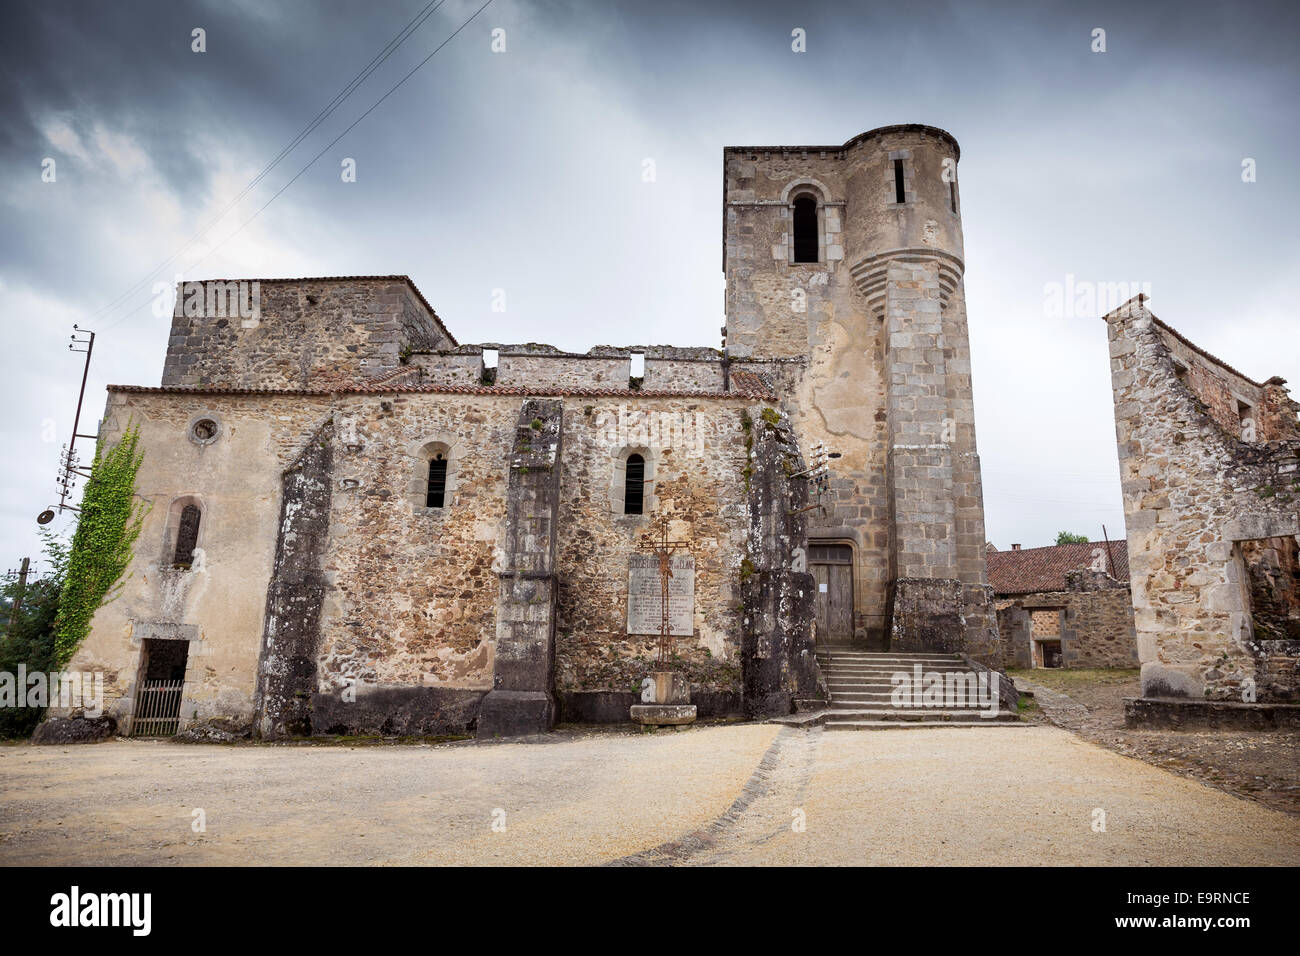 Oradour-sur-Glane where on 10 June 1944 642 inhabitants were massacred by a WW2 German Waffen-SS company, Limousin, France Stock Photo